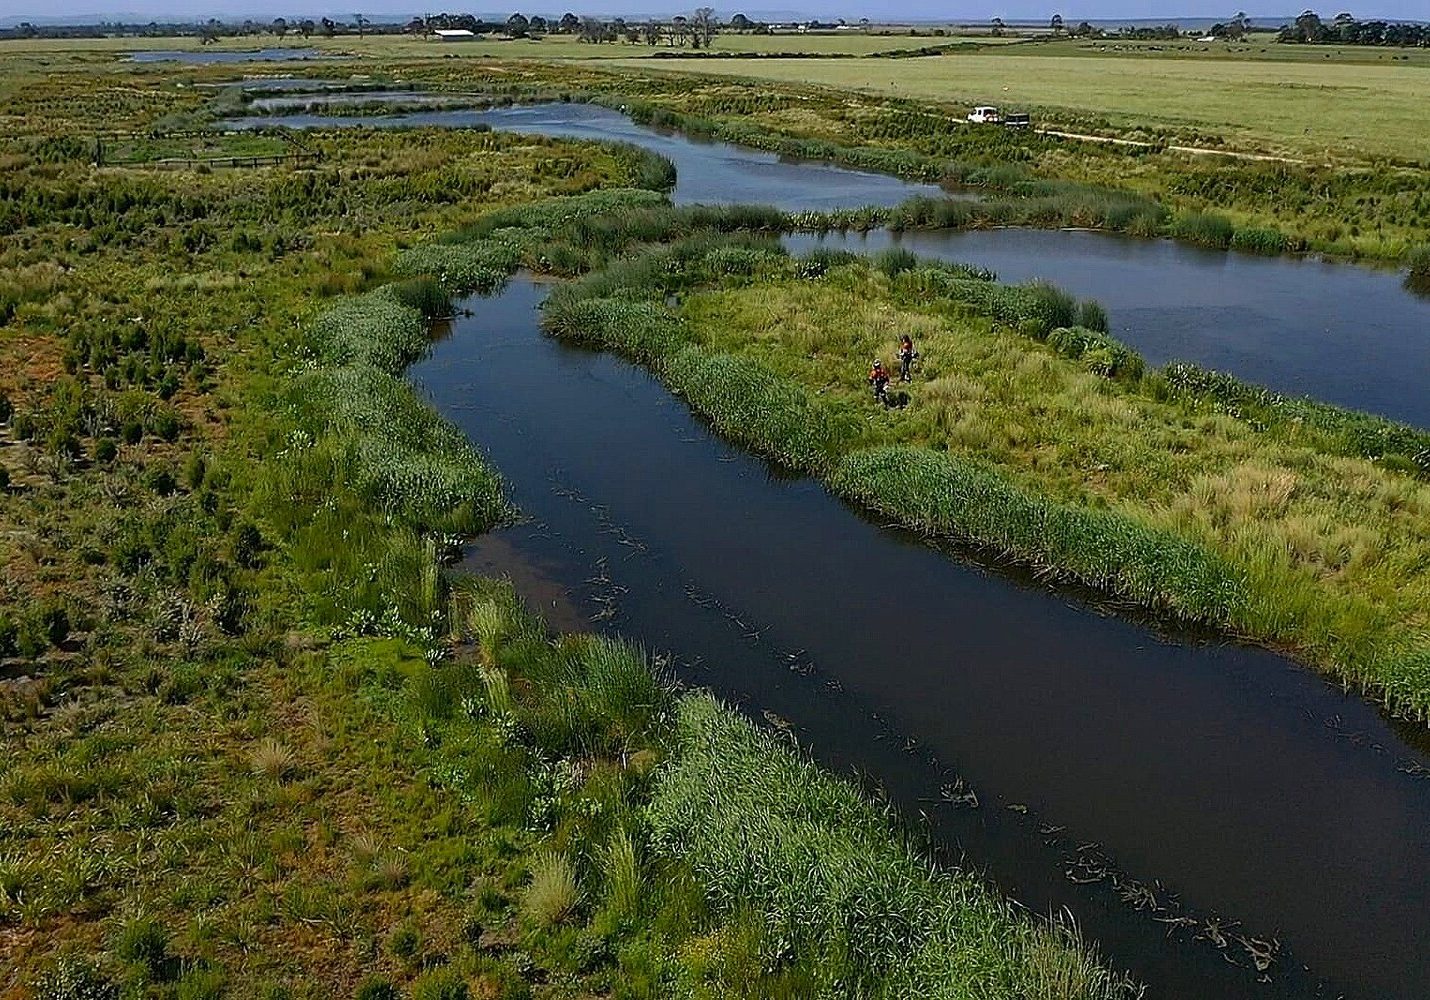 Koo Wee Rup Wetlands: Expert Solutions for Wetland Creation and Management